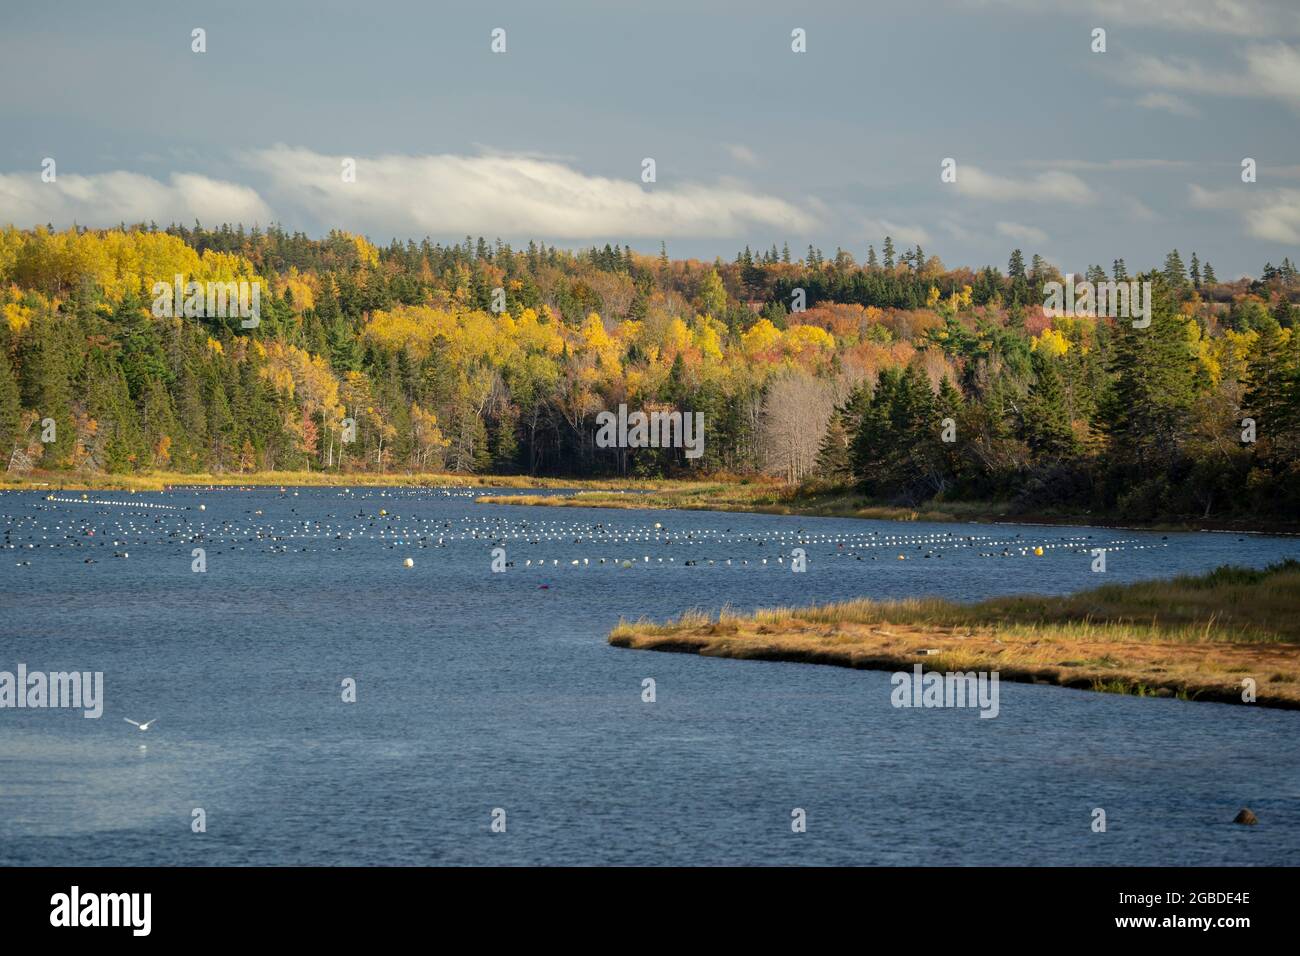 Fields of aquatic grown mussels in the coves along the shores of Prince Edward, Canada. Stock Photo